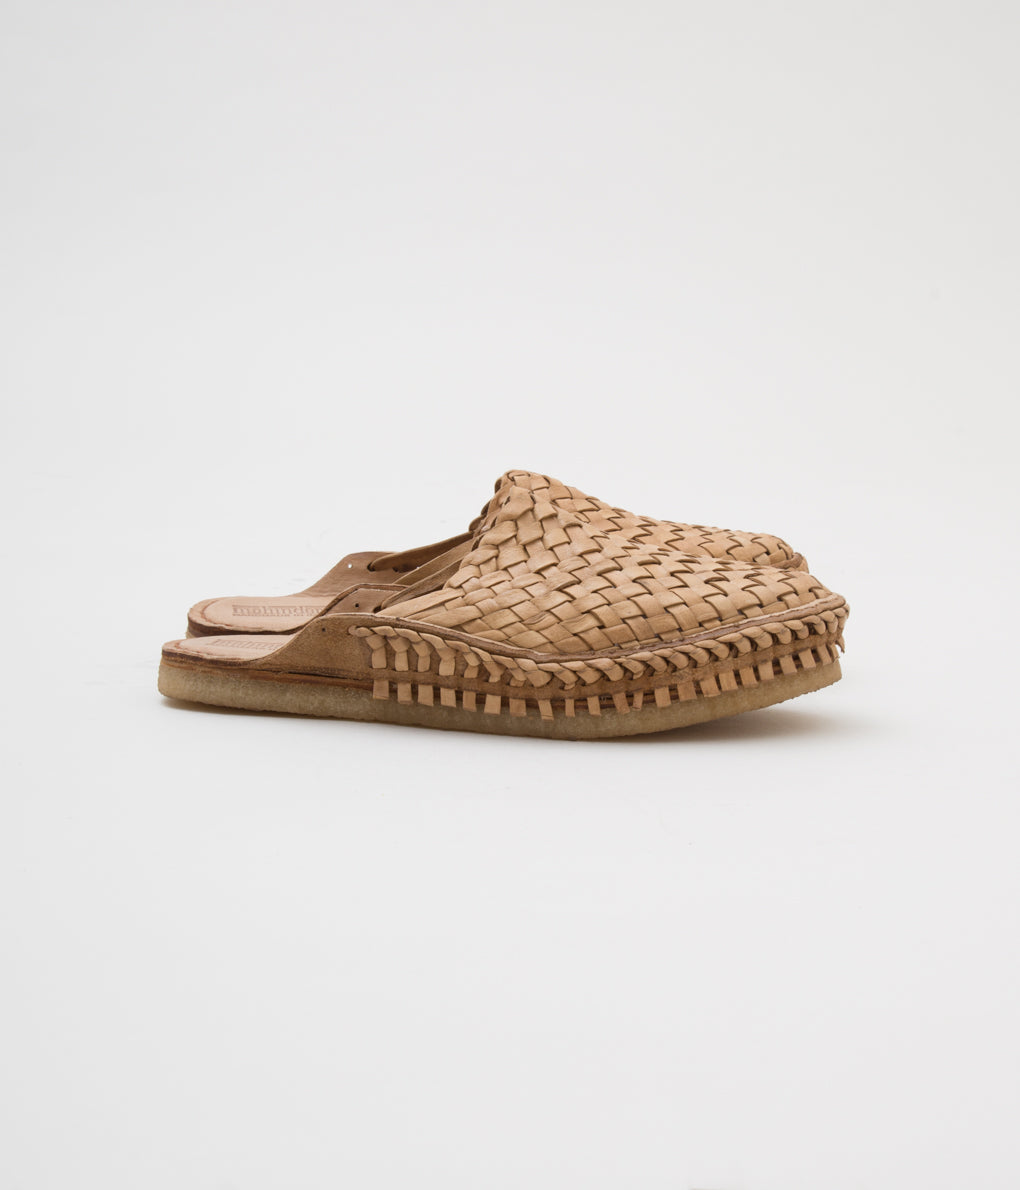 MOHINDERS "WOVEN CITY SLIPPER" (NATURAL)